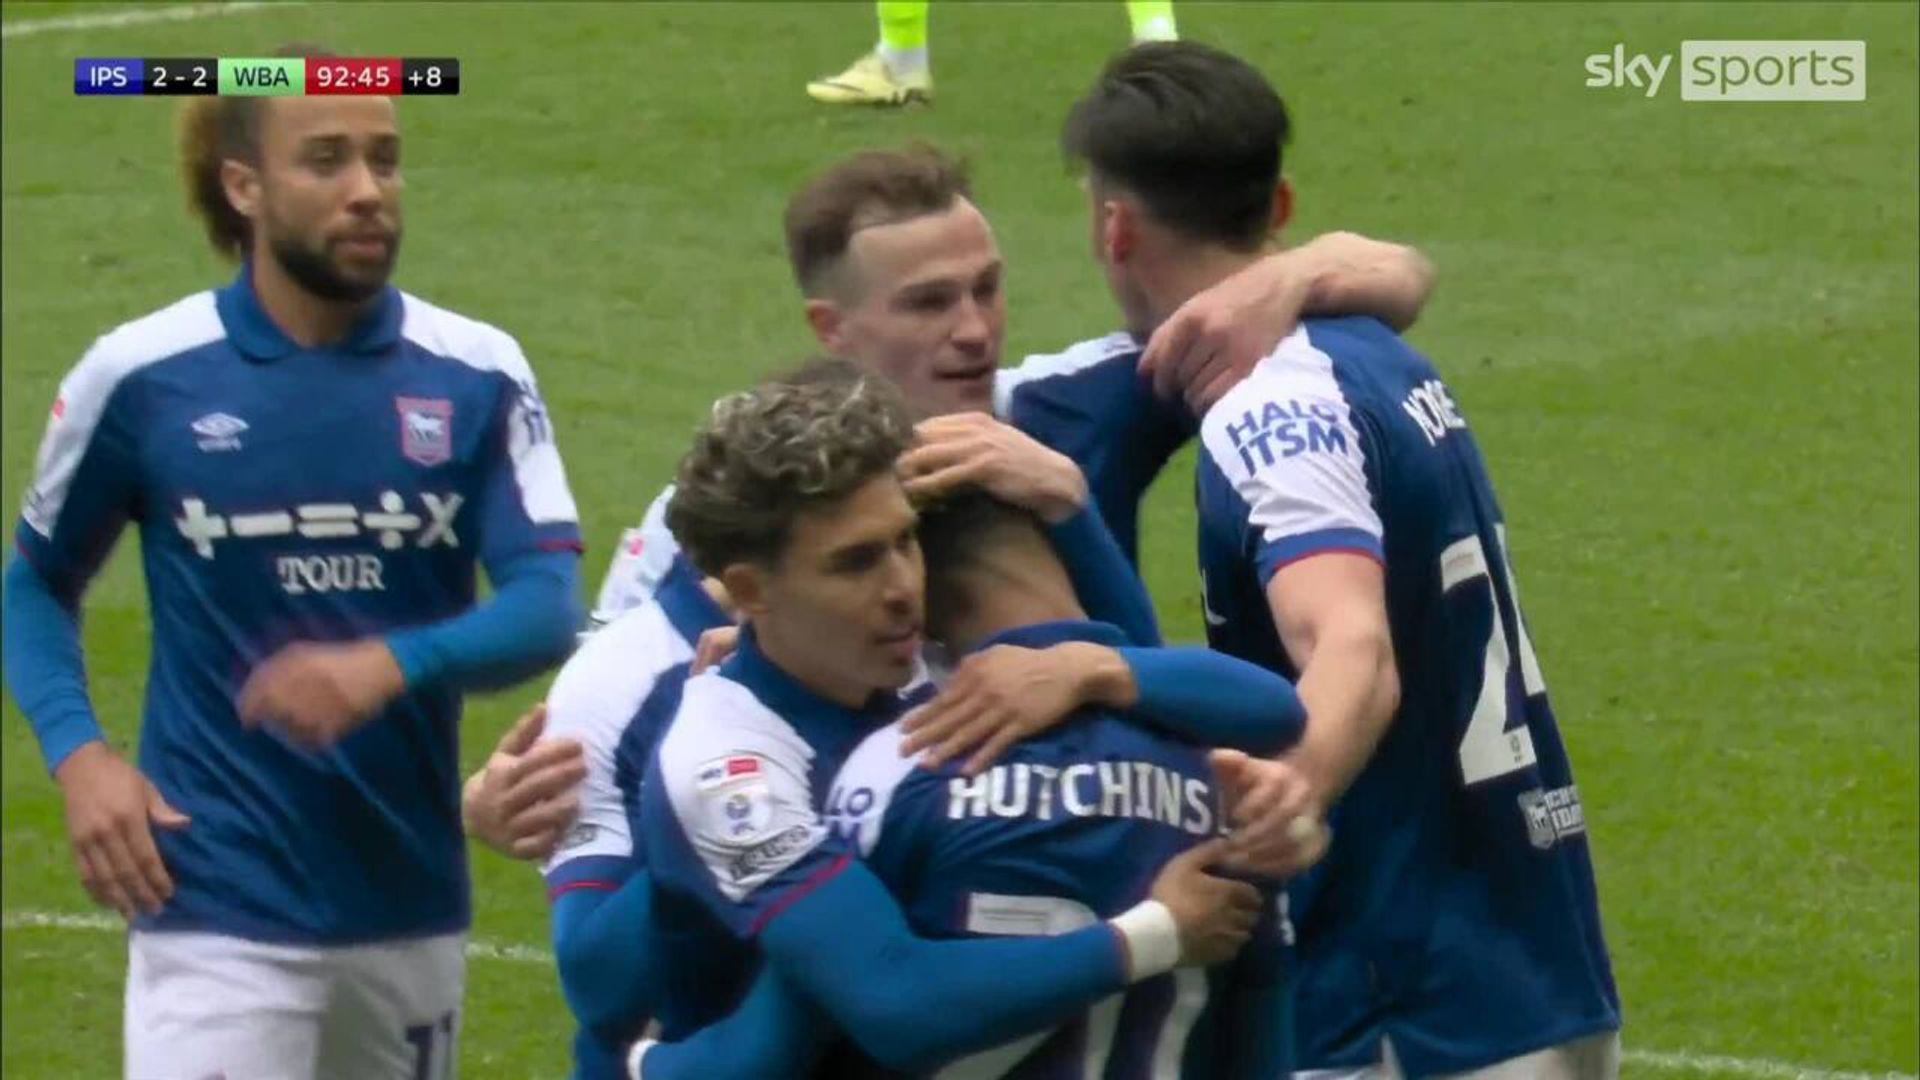 Hutchinson scores vital late equaliser for Ipswich!